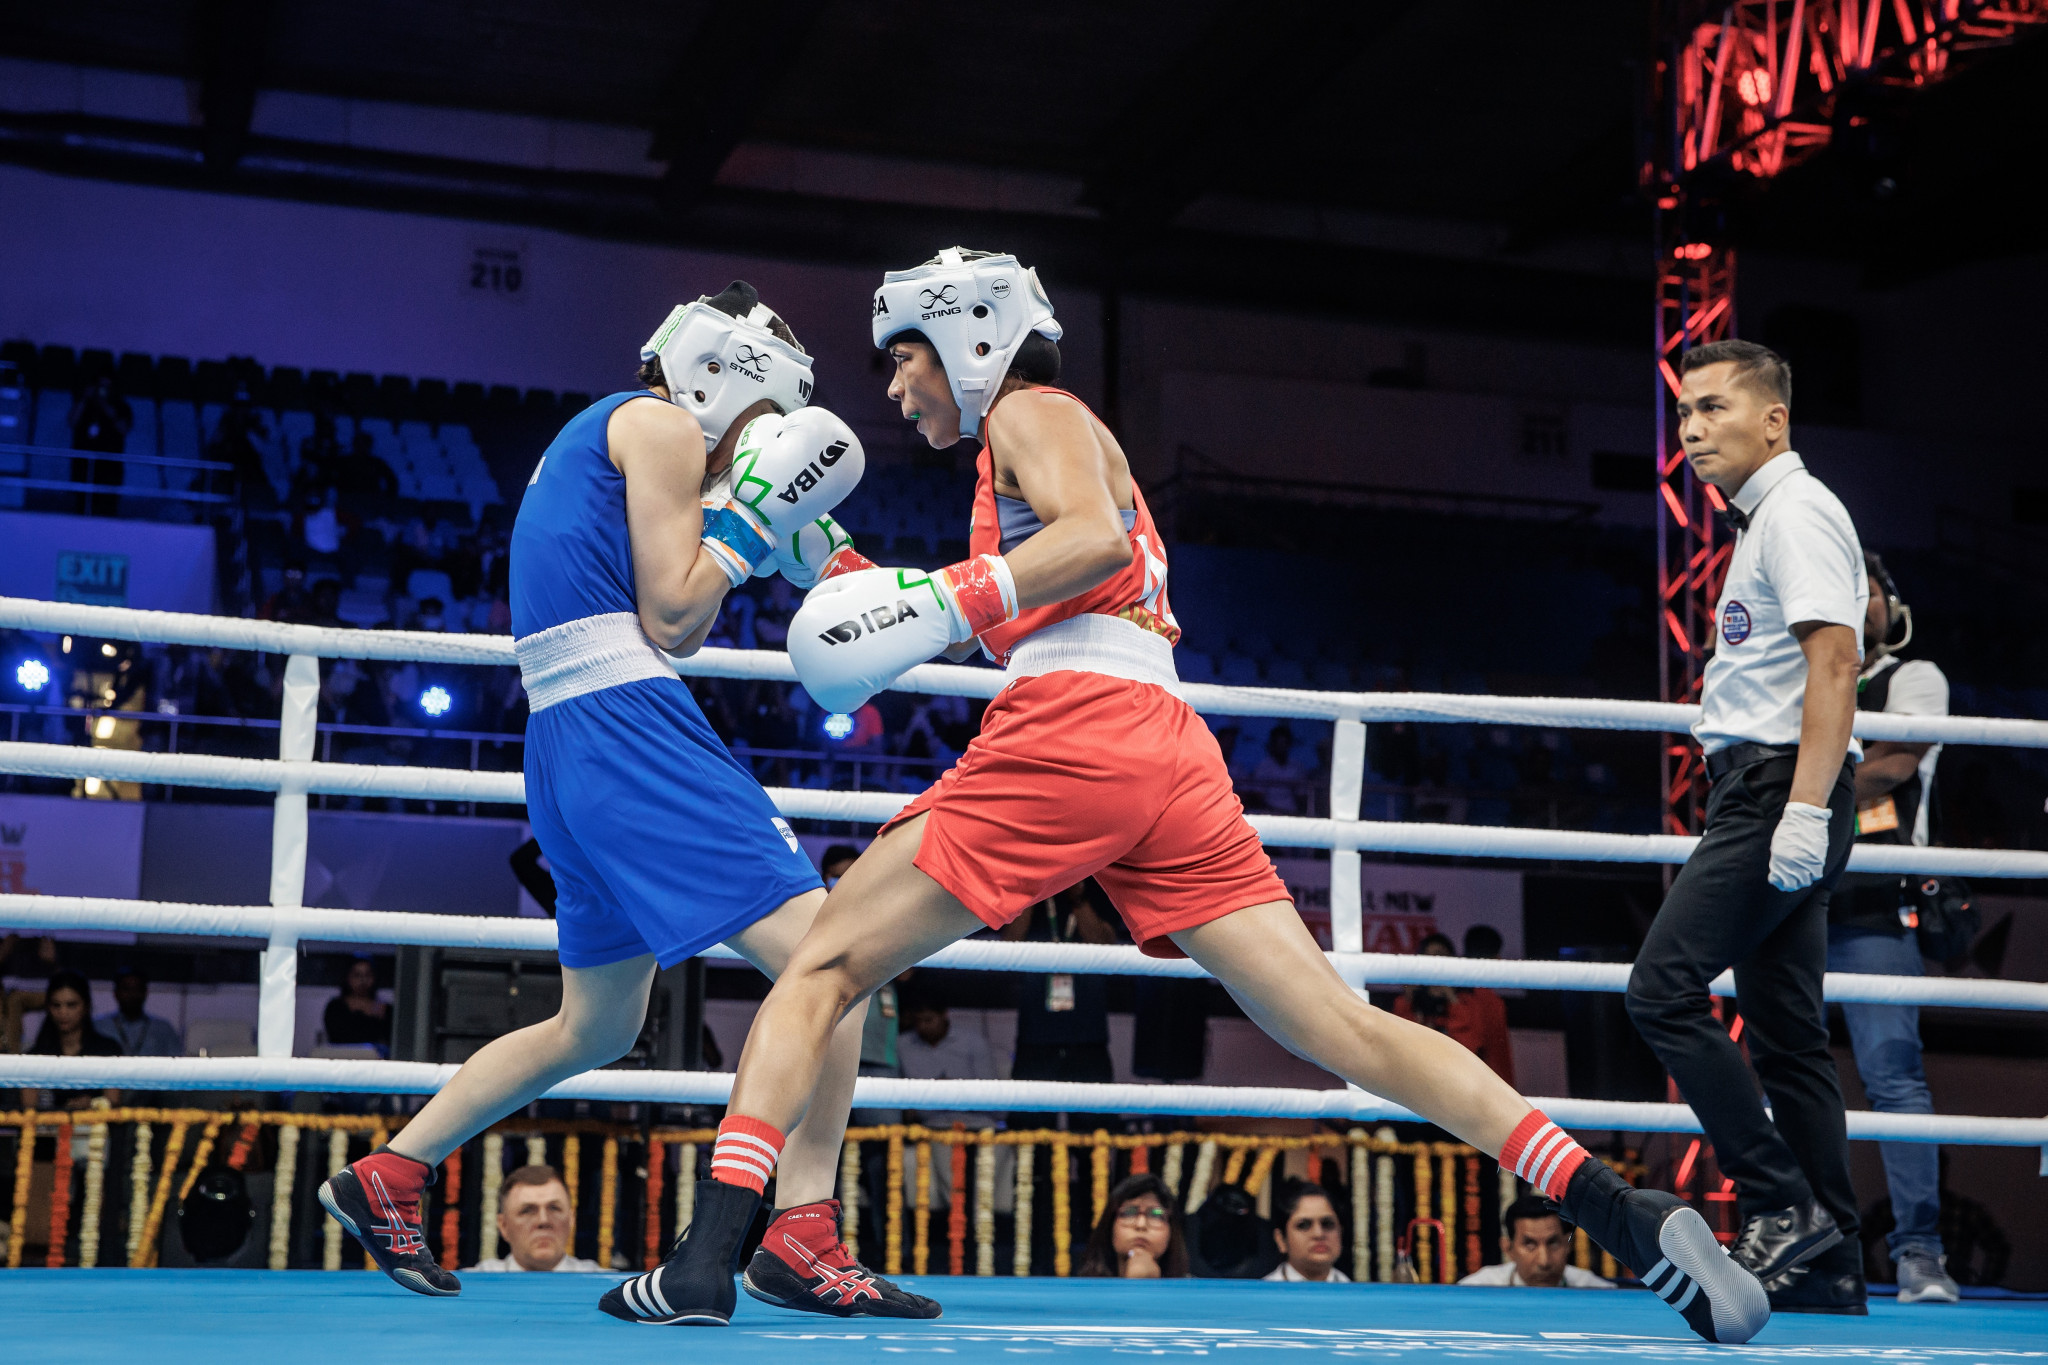 India dominate as Russia lose on return at IBA Women's World Championships